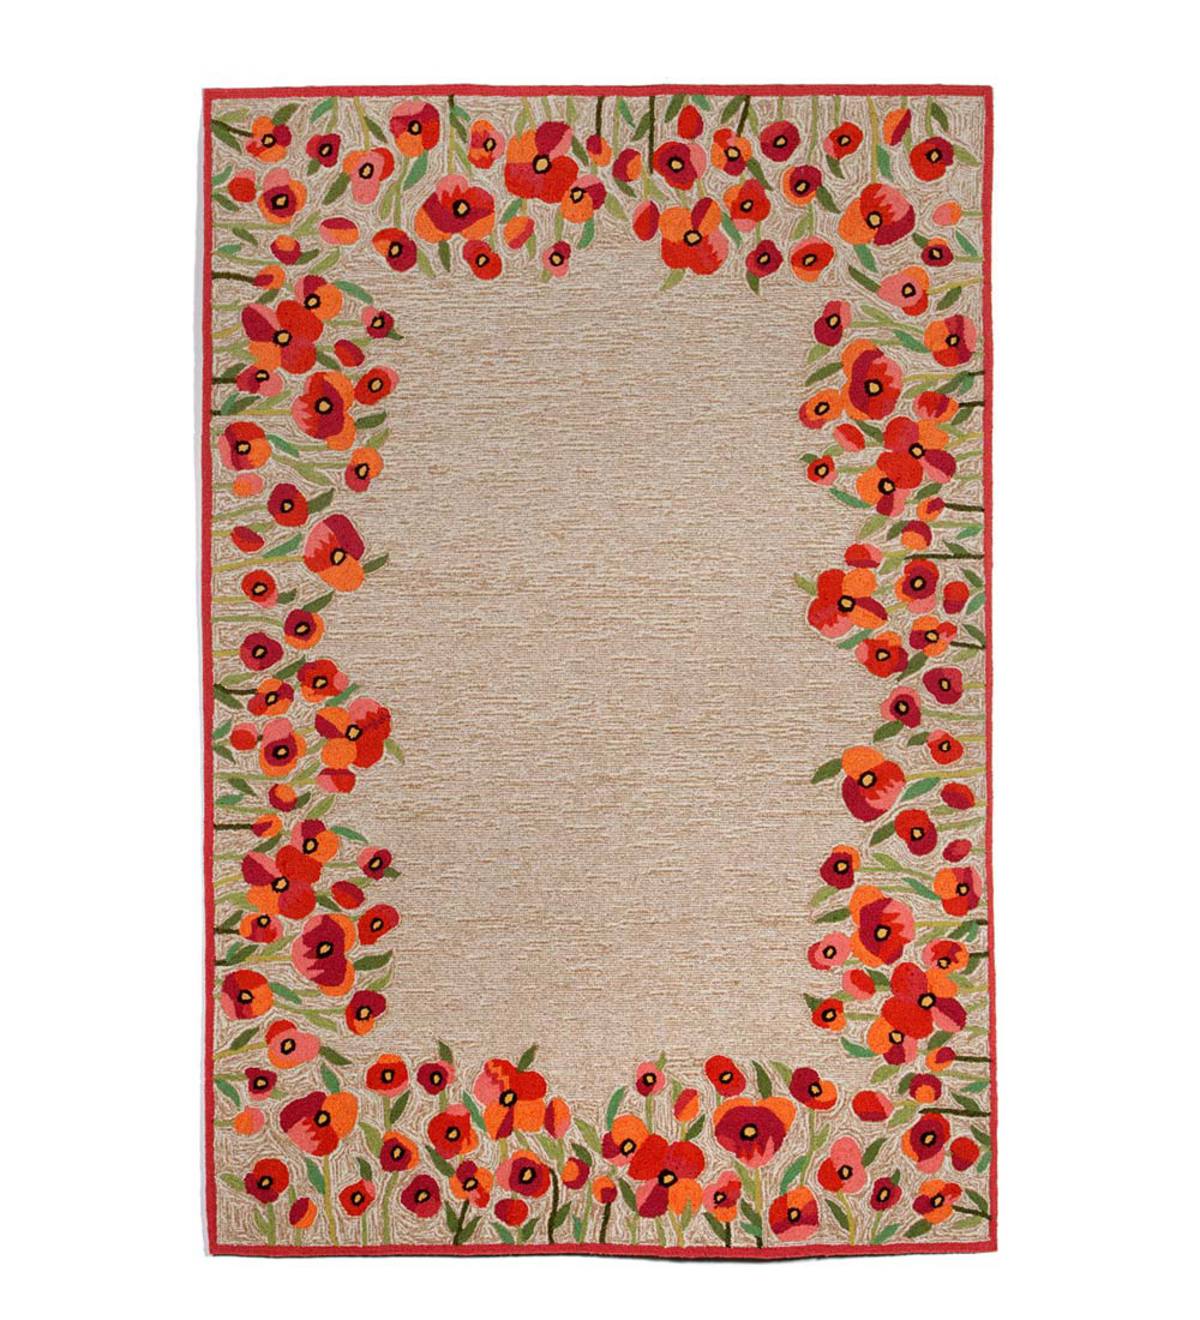 Red Poppies Border Accent Rug, 7'6"W x 9'6"L - Red